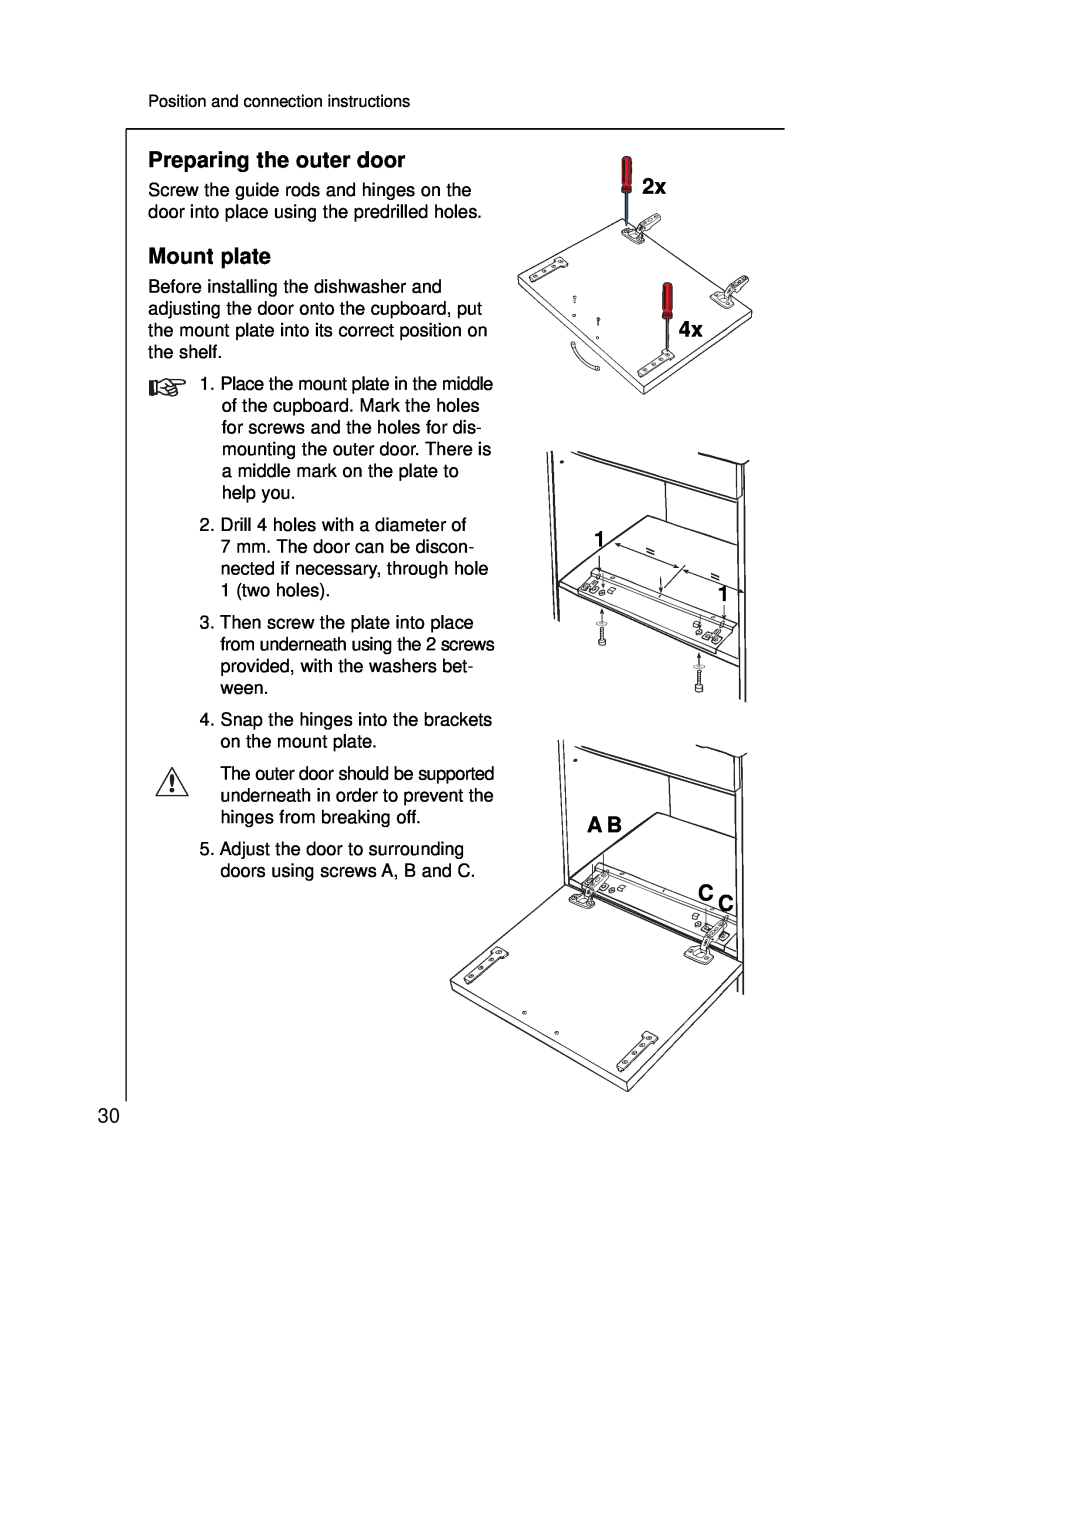 Electrolux 45250Vi manual Preparing the outer door, Mount plate, 2x 4x, A B C C 